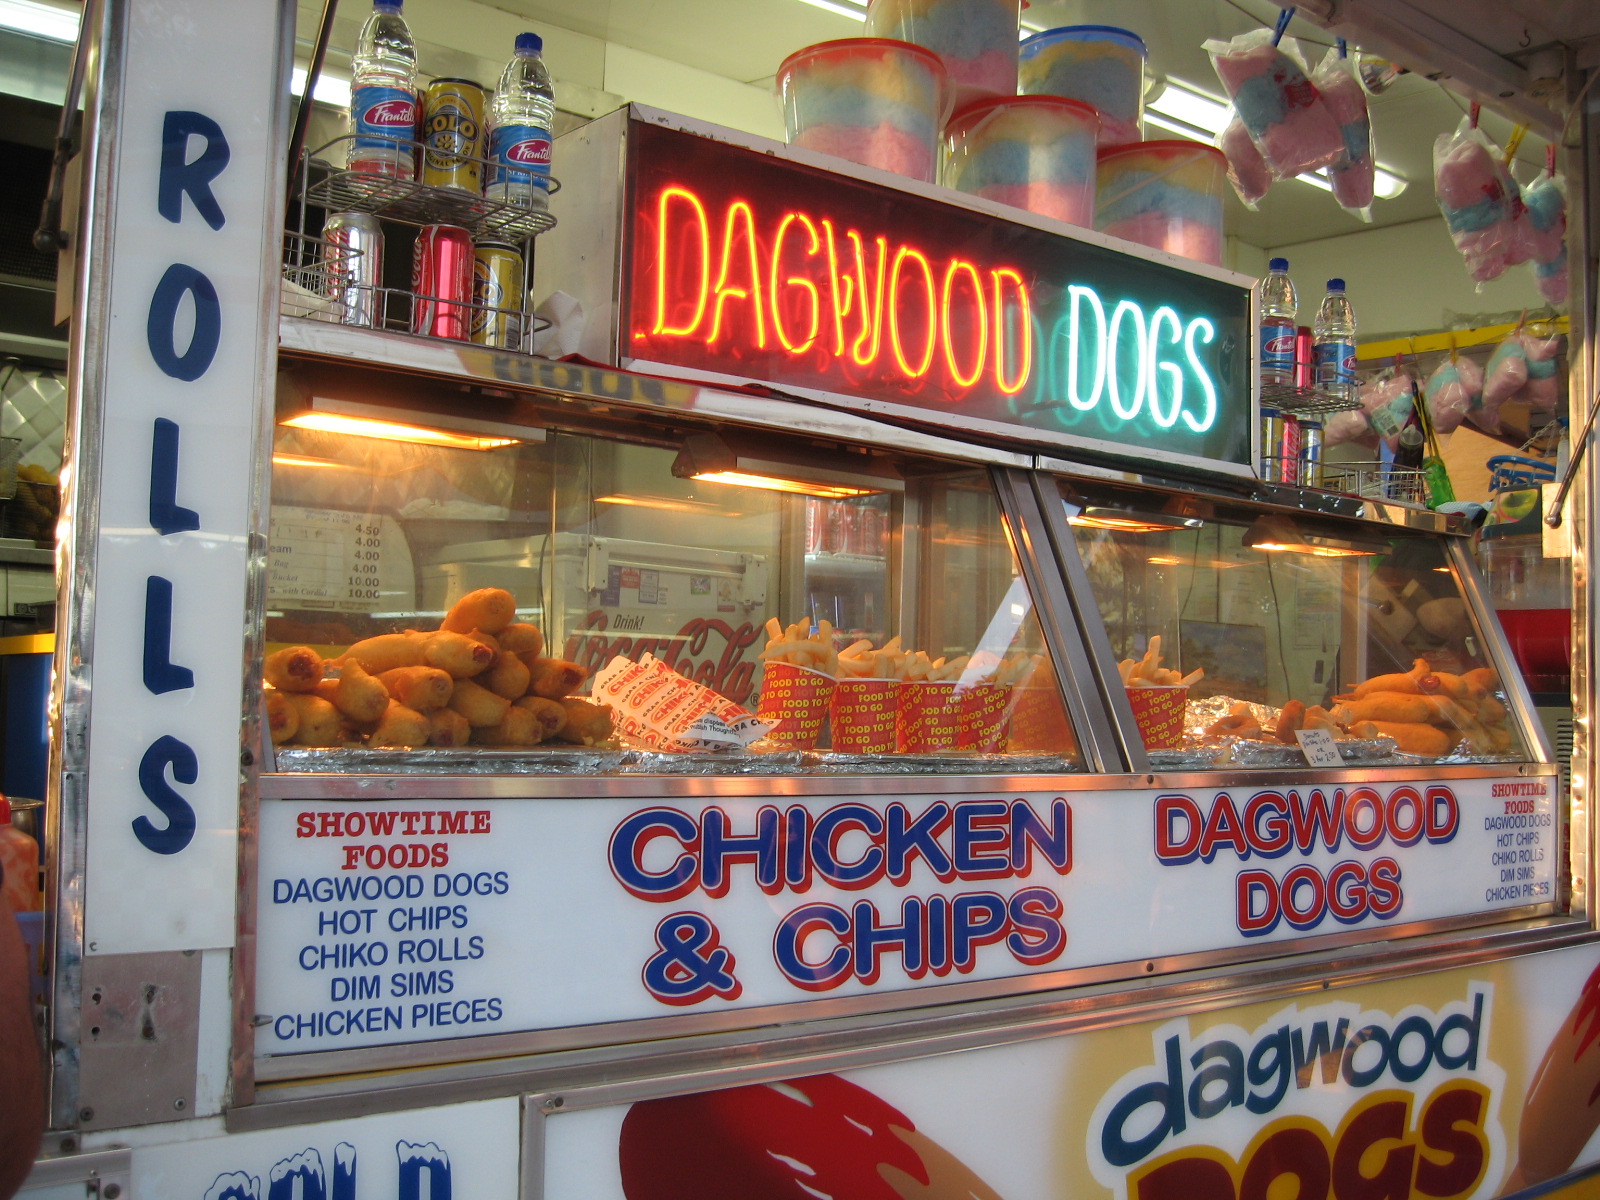 Dagwood Dogs at the carnival